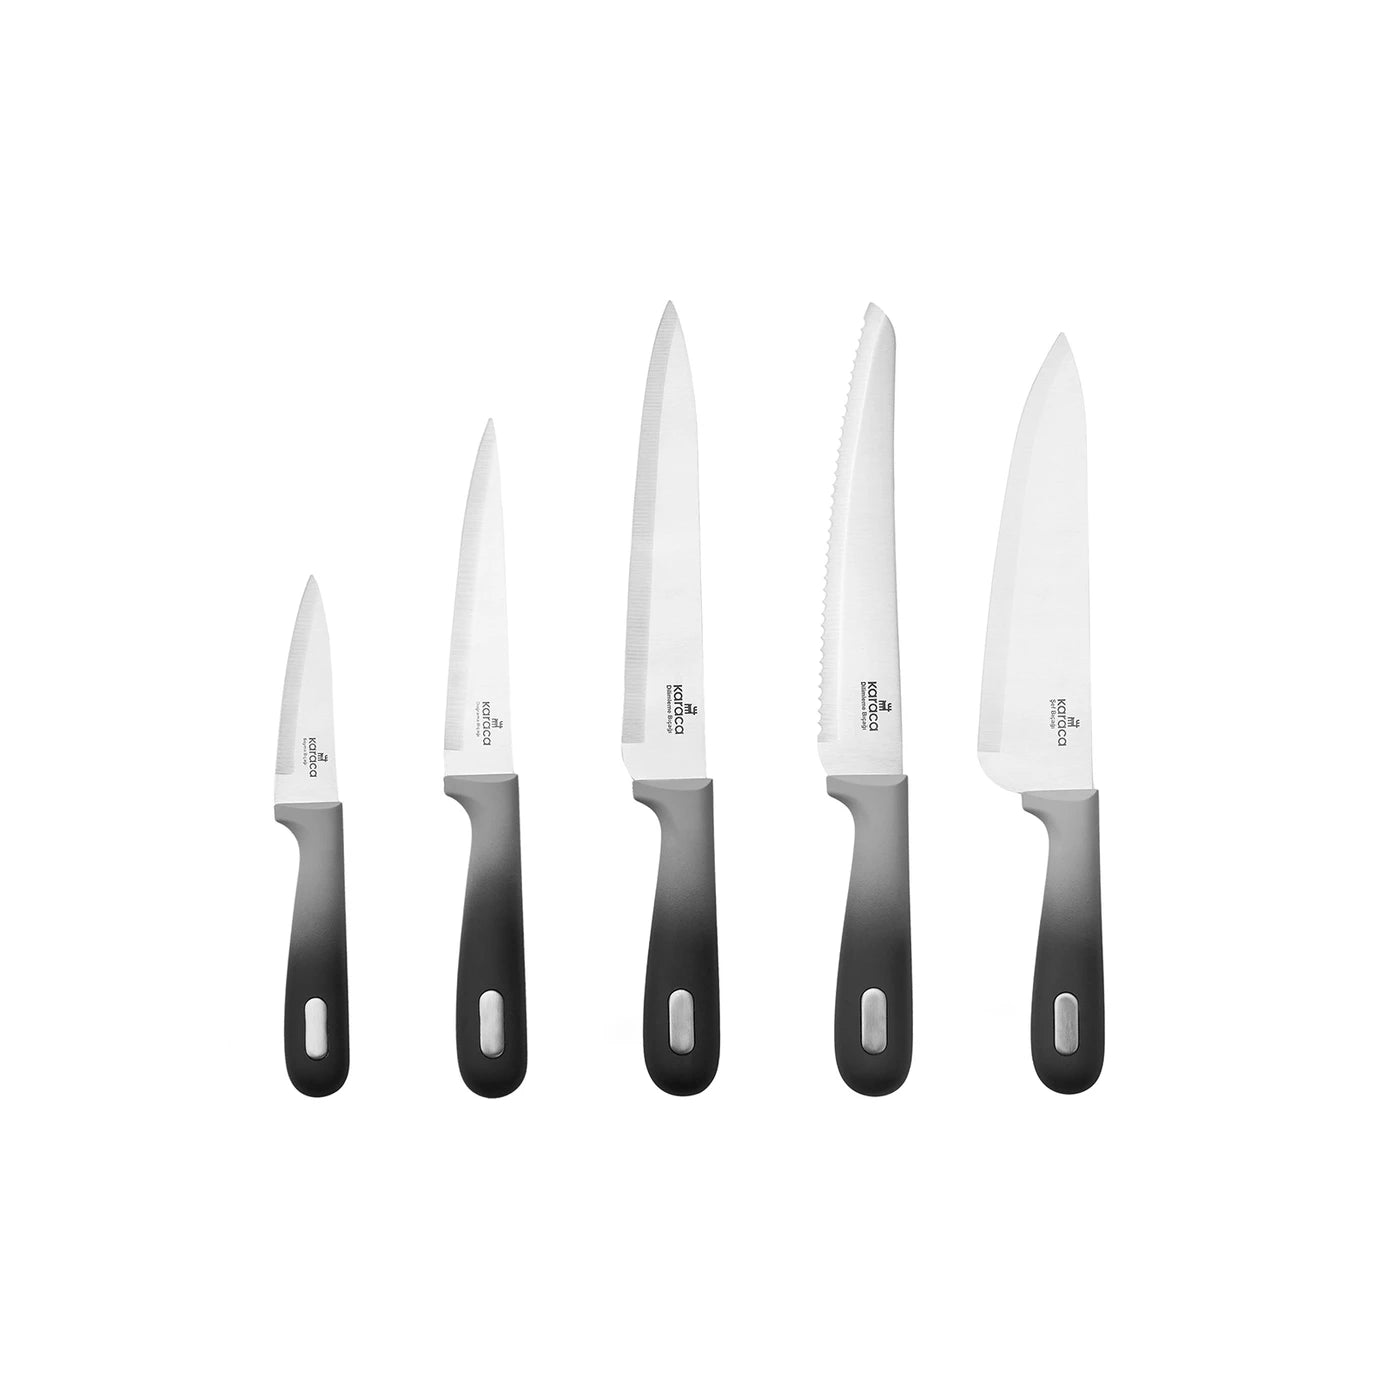 A Knife Set 6 Pieces for Versatile Cooking